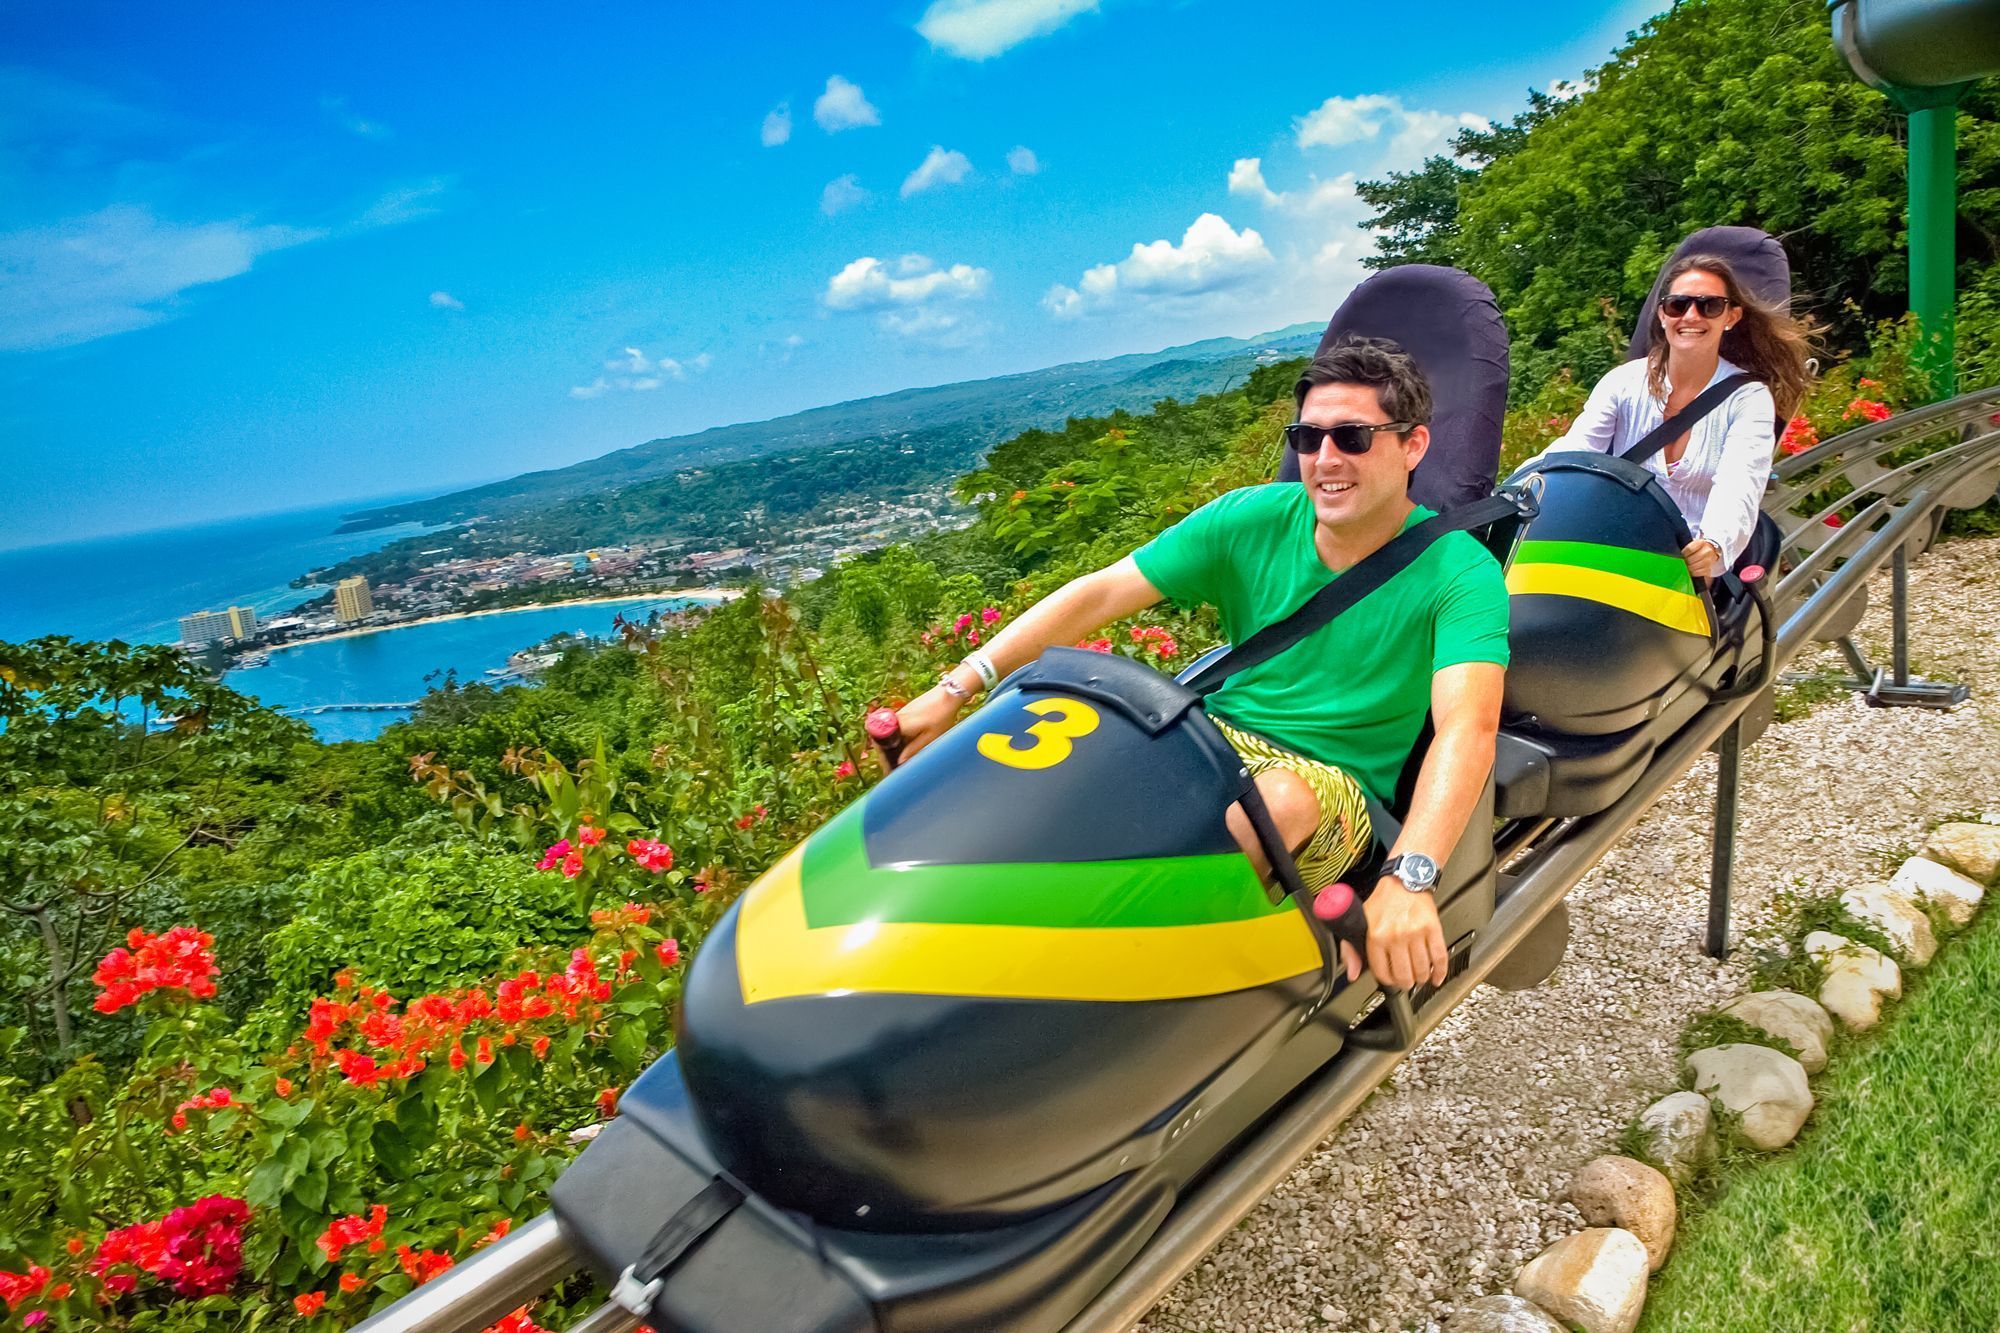 Zipline, Bobsled, Raggamuffin… So Much To Do At Mystic Mountain Jamaica!